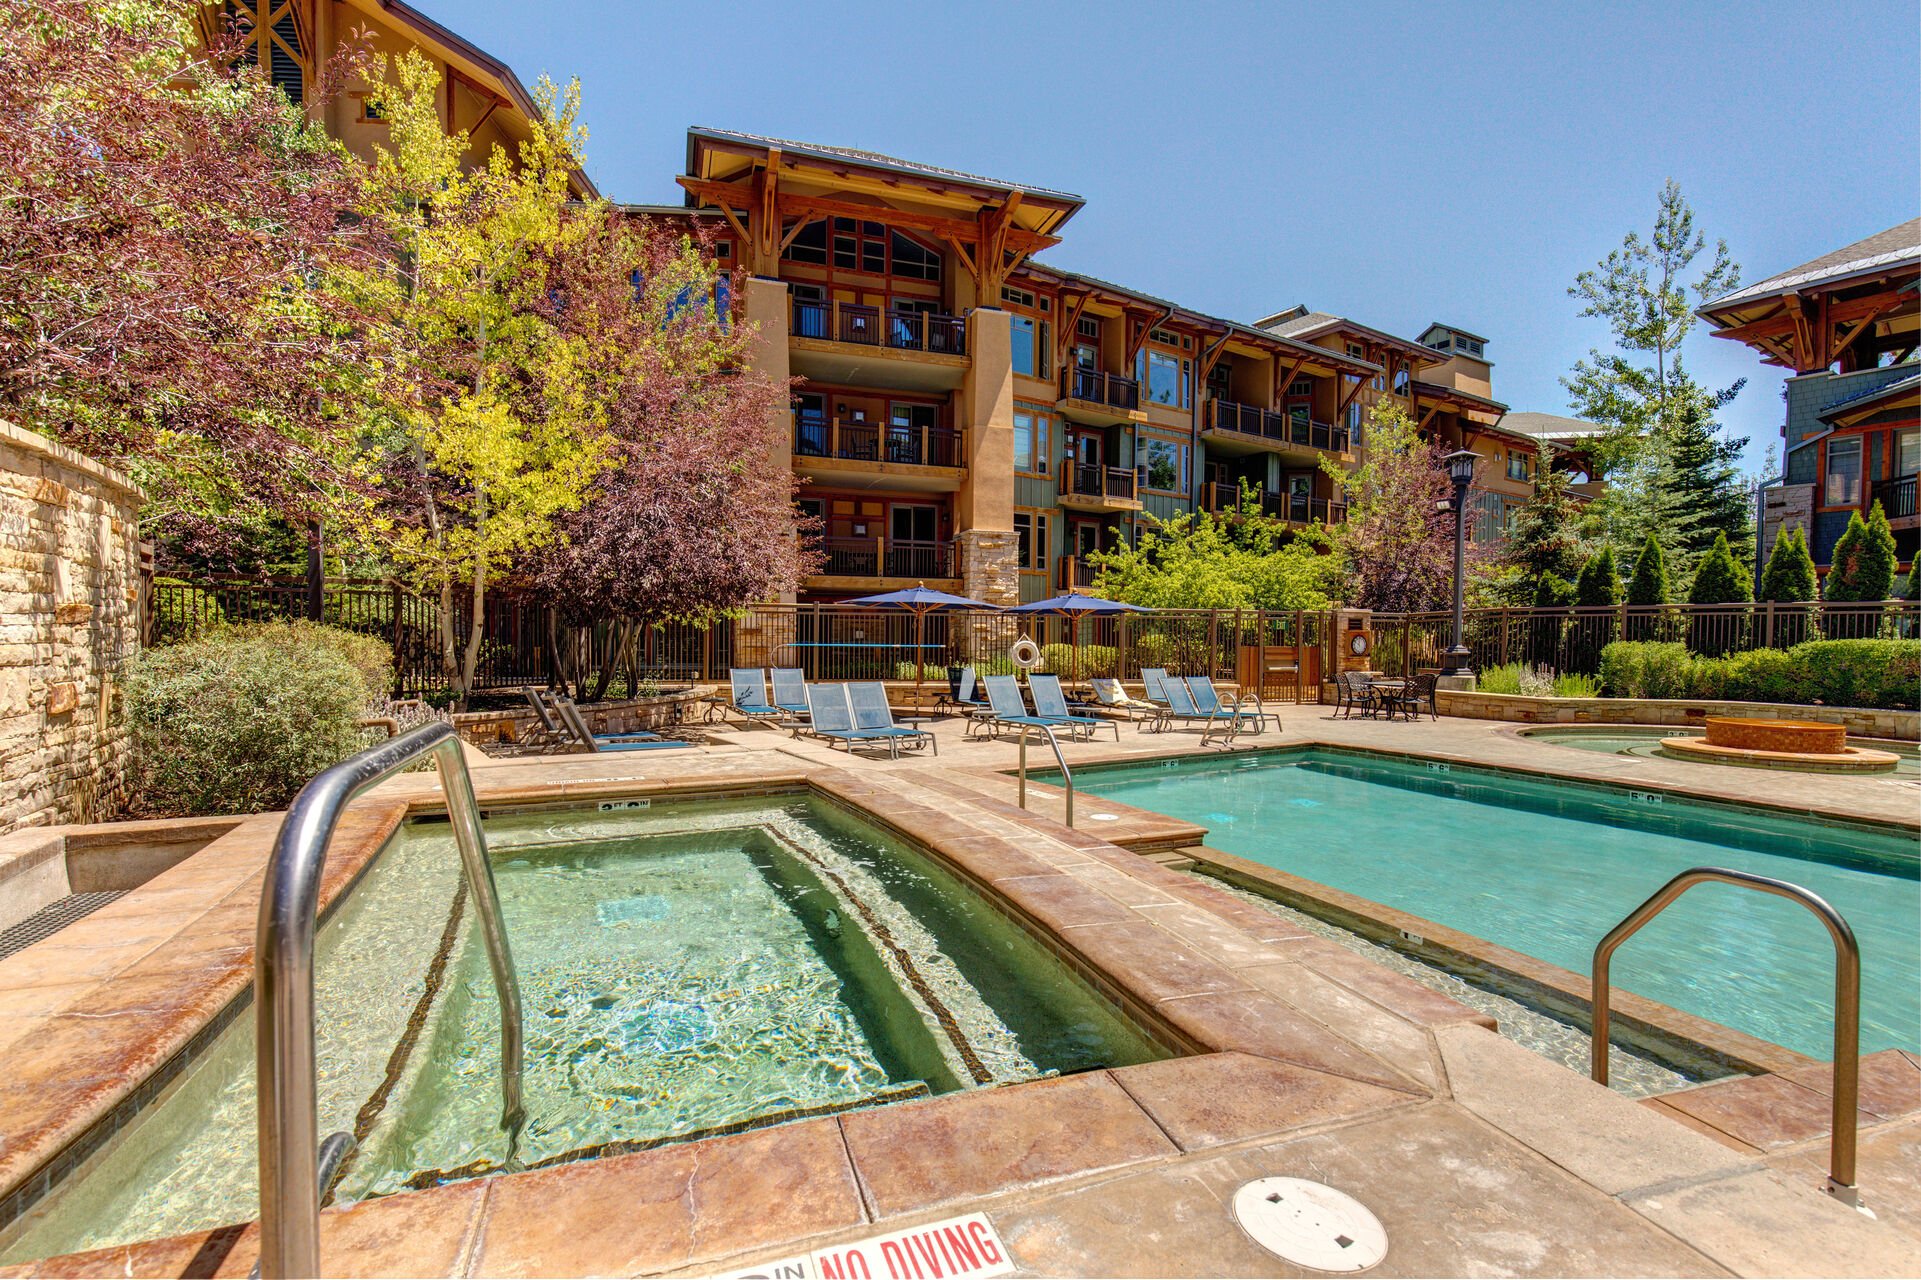 Communal heated pool and hot tubs